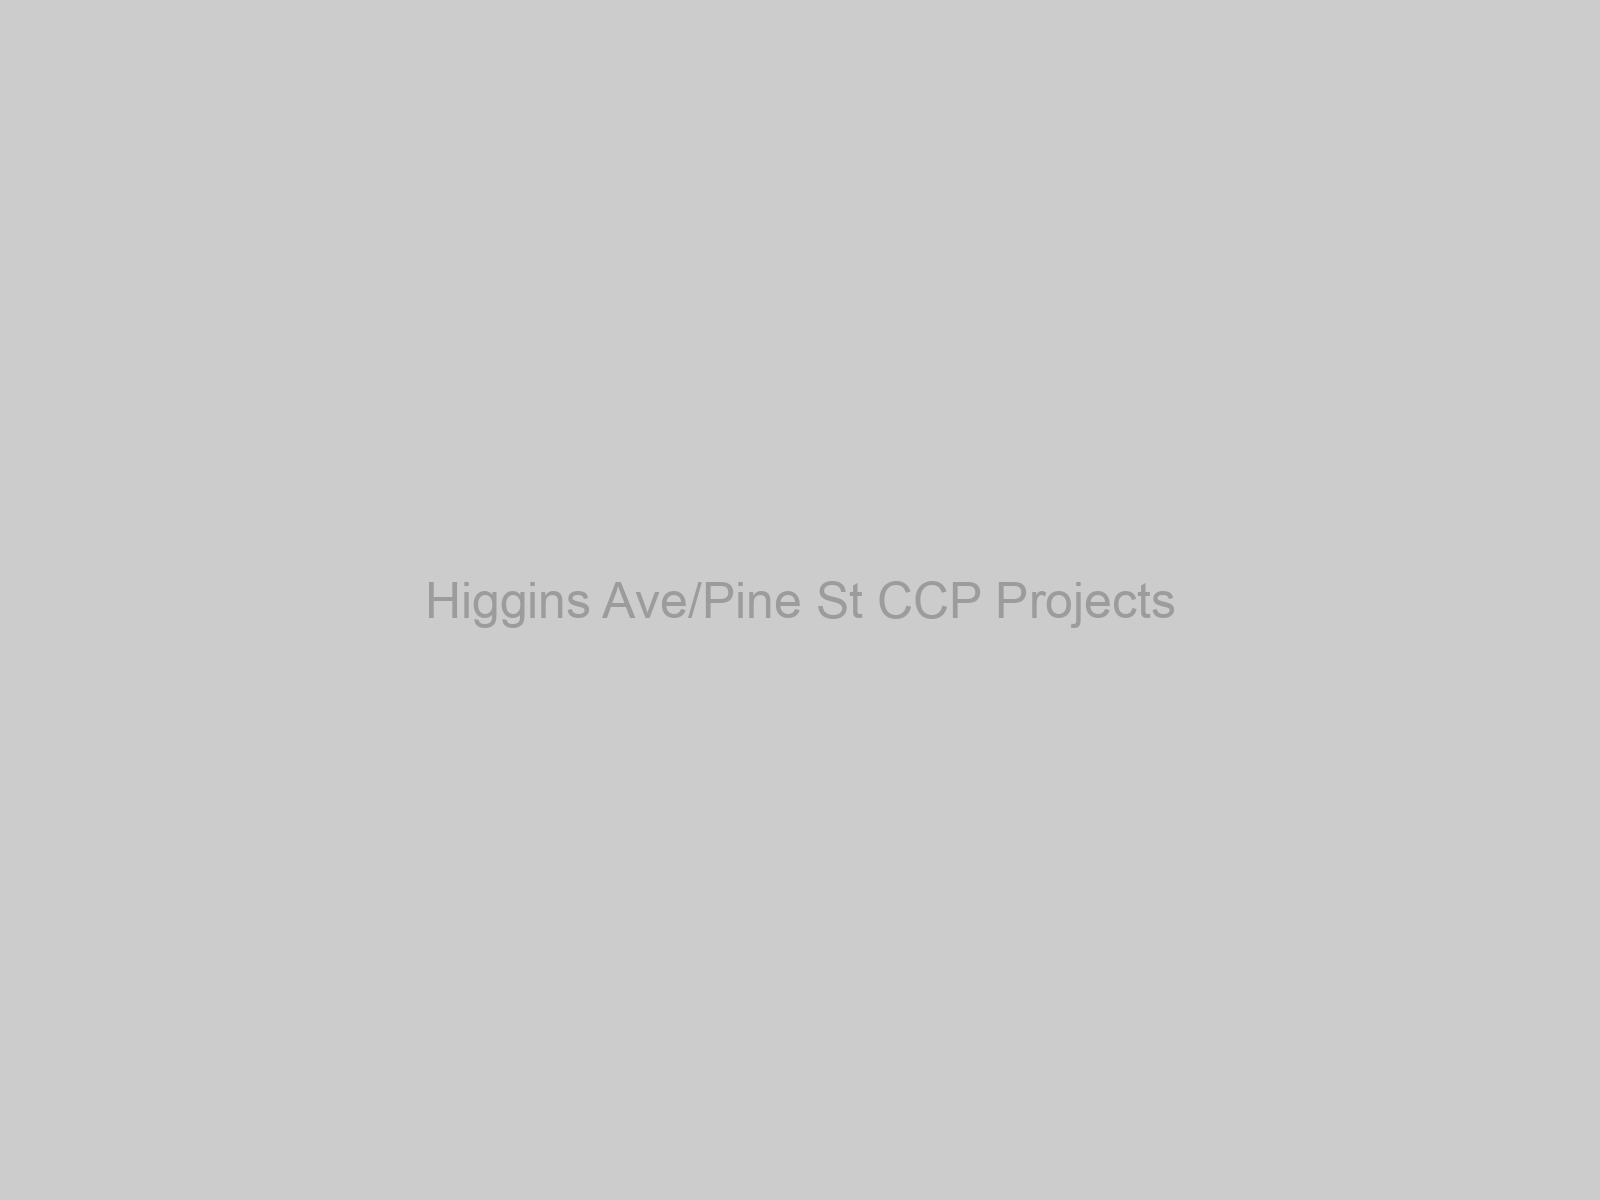 Higgins Ave/Pine St CCP Projects